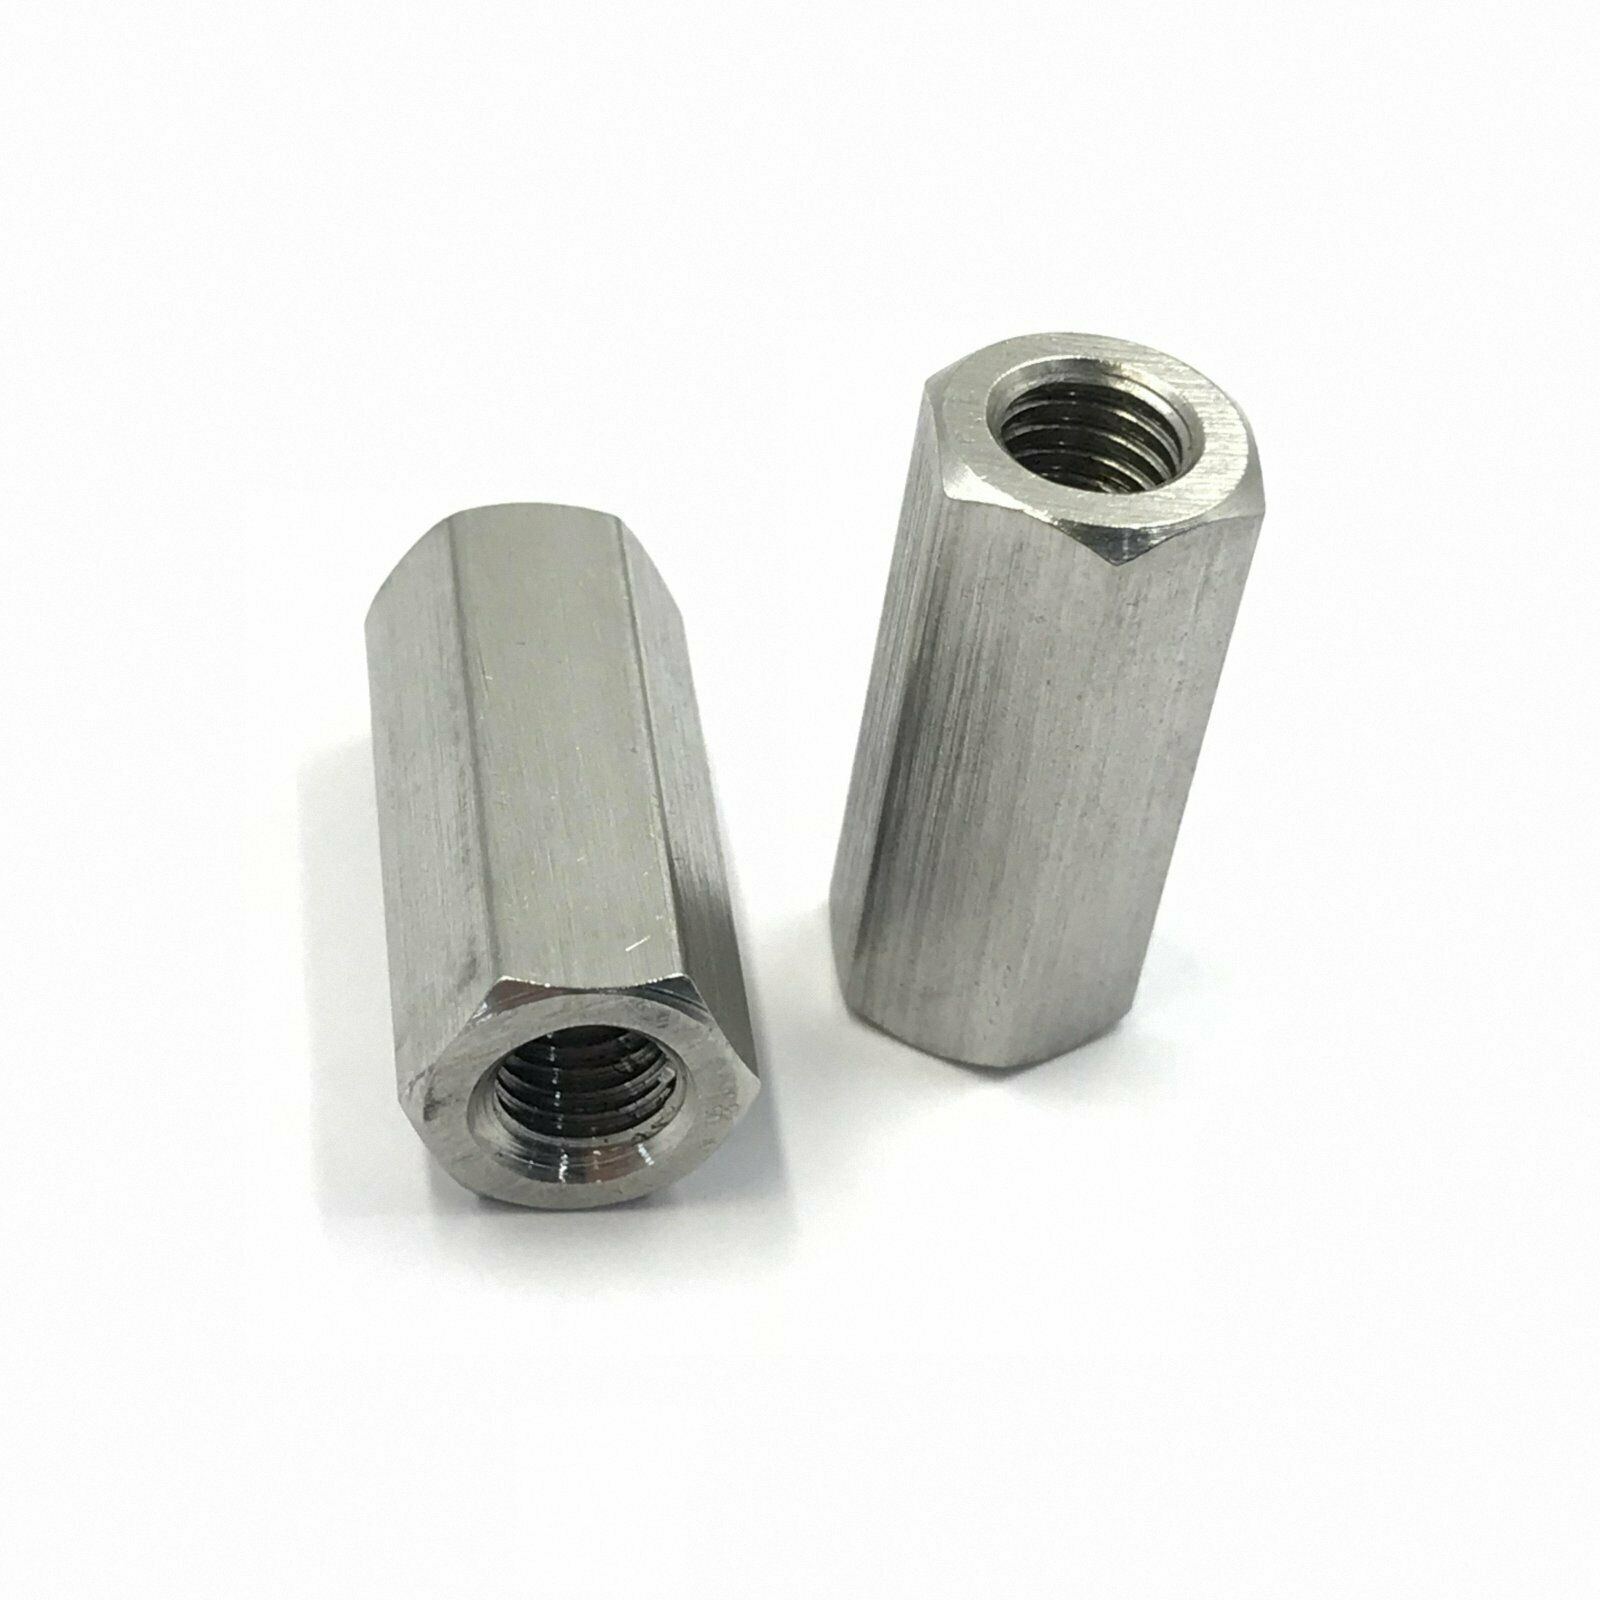 2 Pcs 304 Stainless Steel M6 x 1.0 Long Rod Coupling Hex Nut